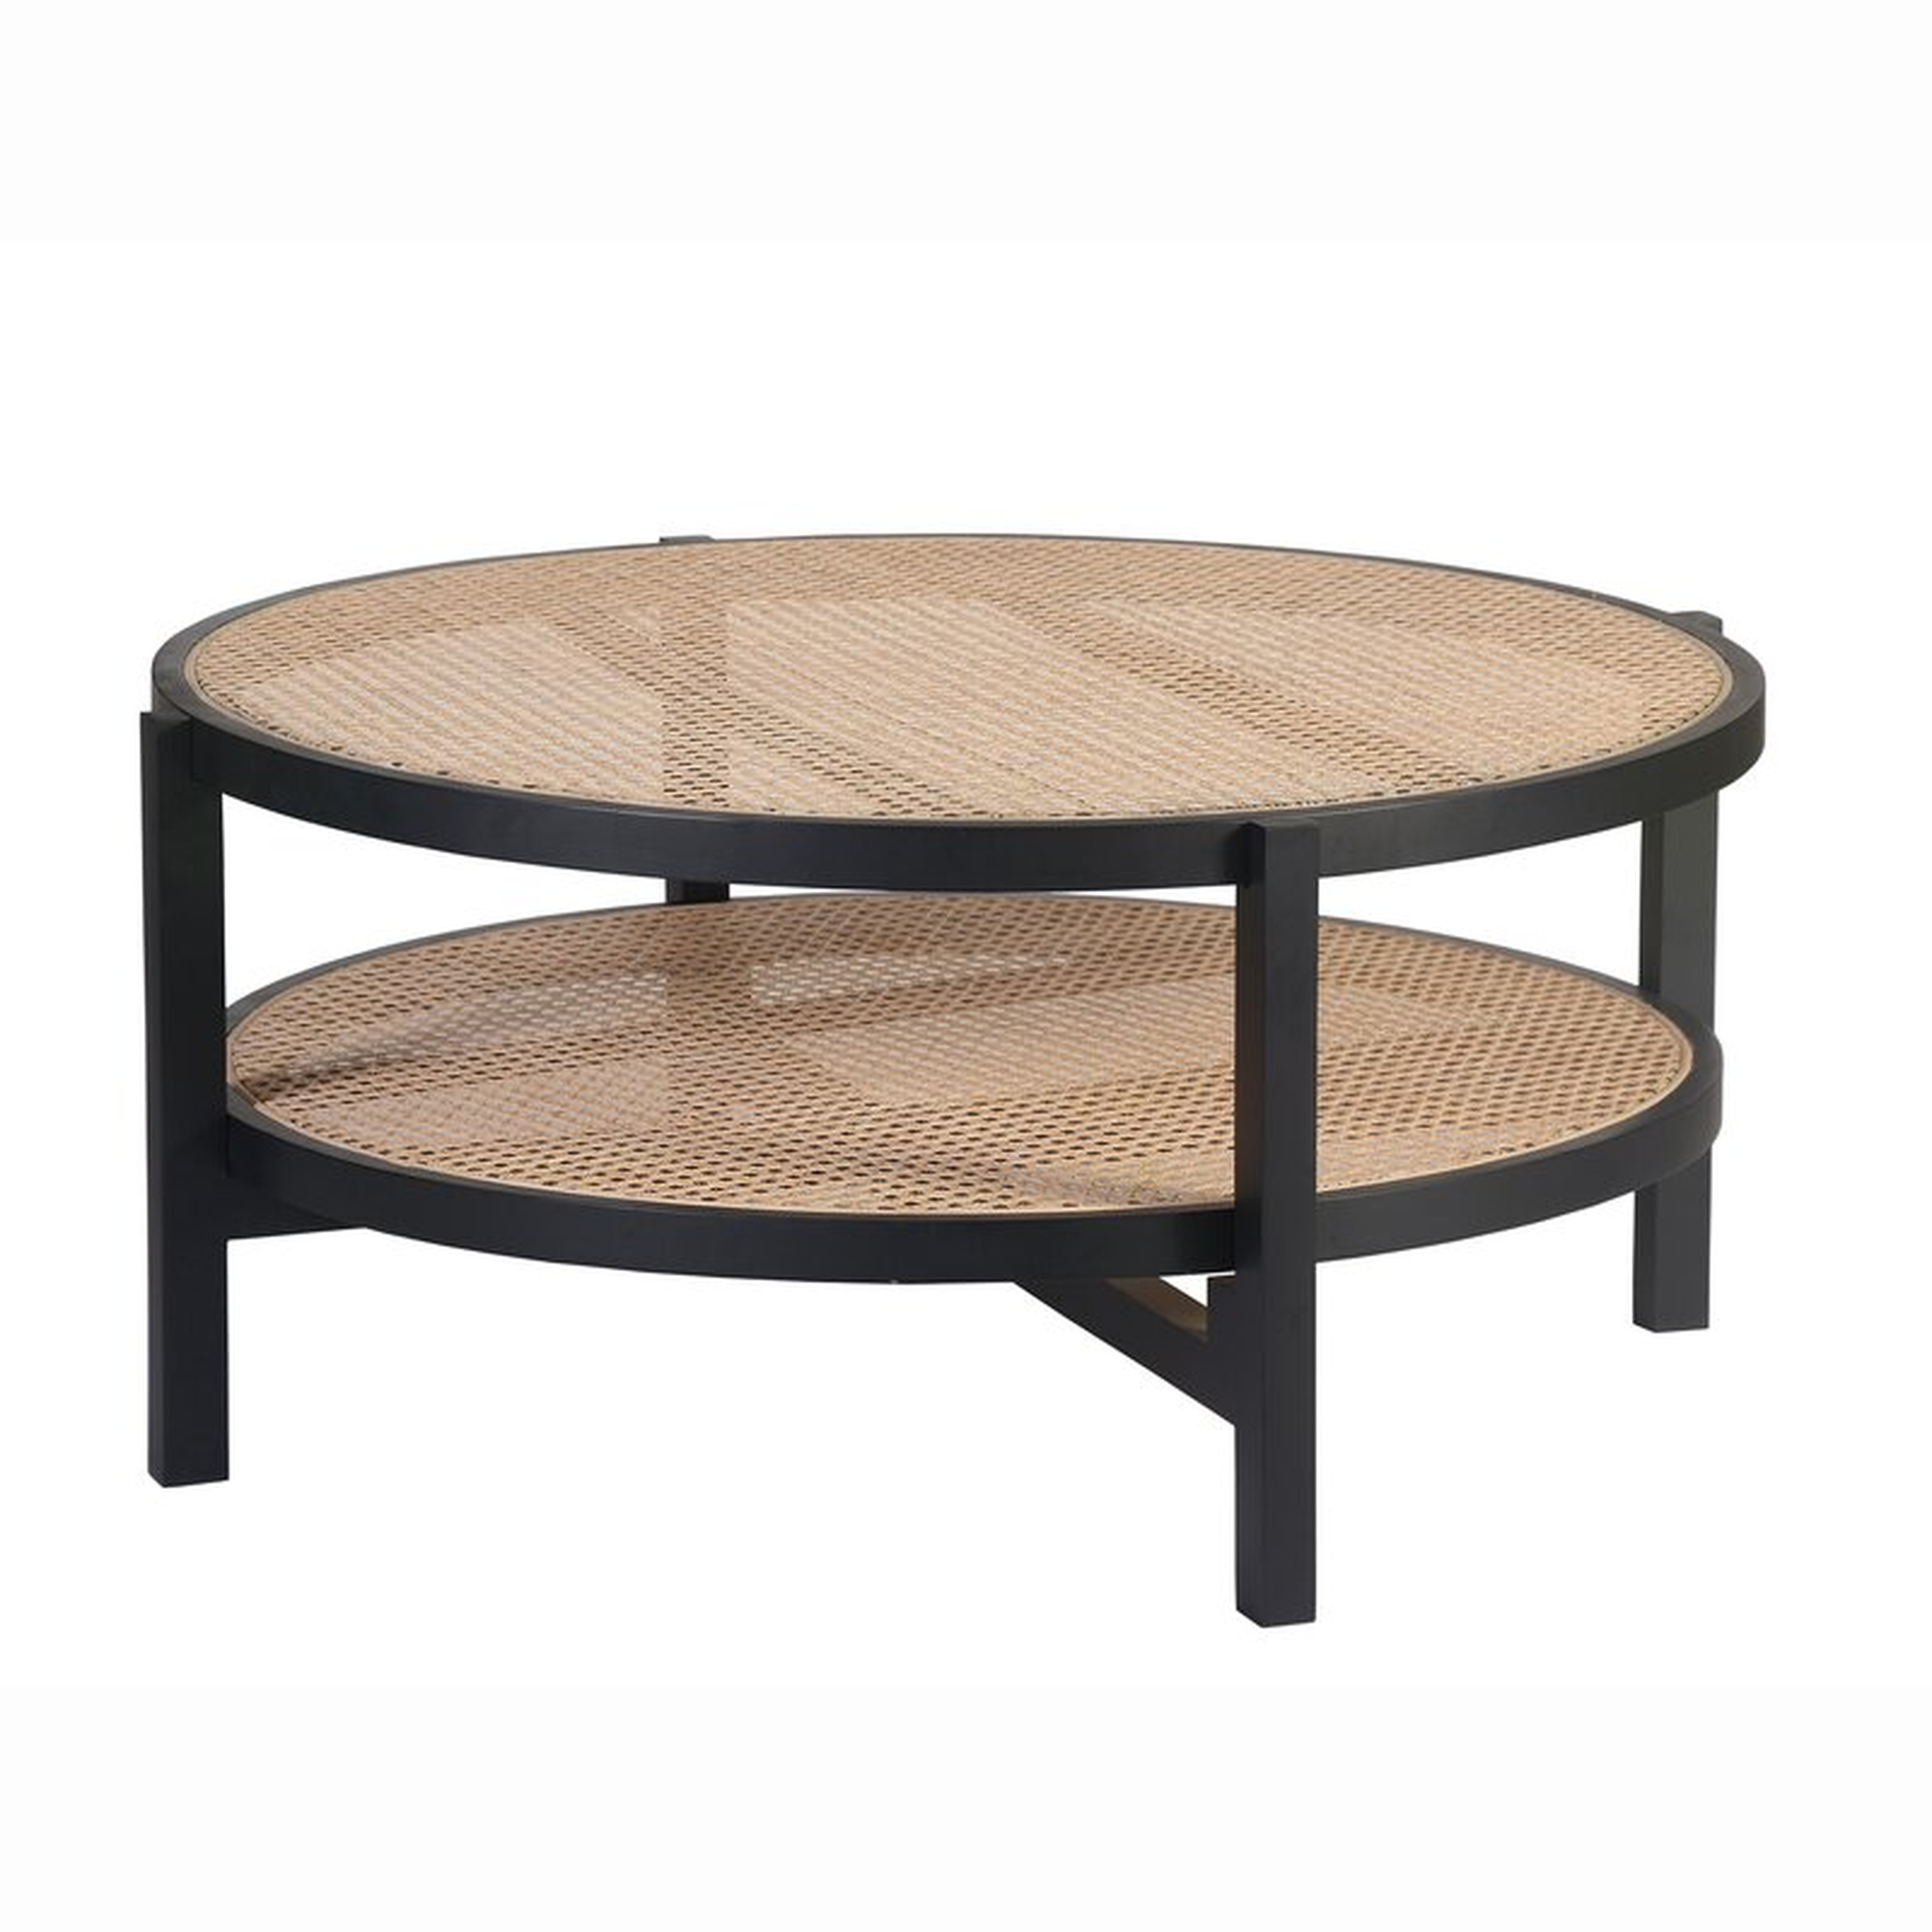 IzabellaI Solid Wood With Natural Cane Coffee Table Open Box - Wayfair